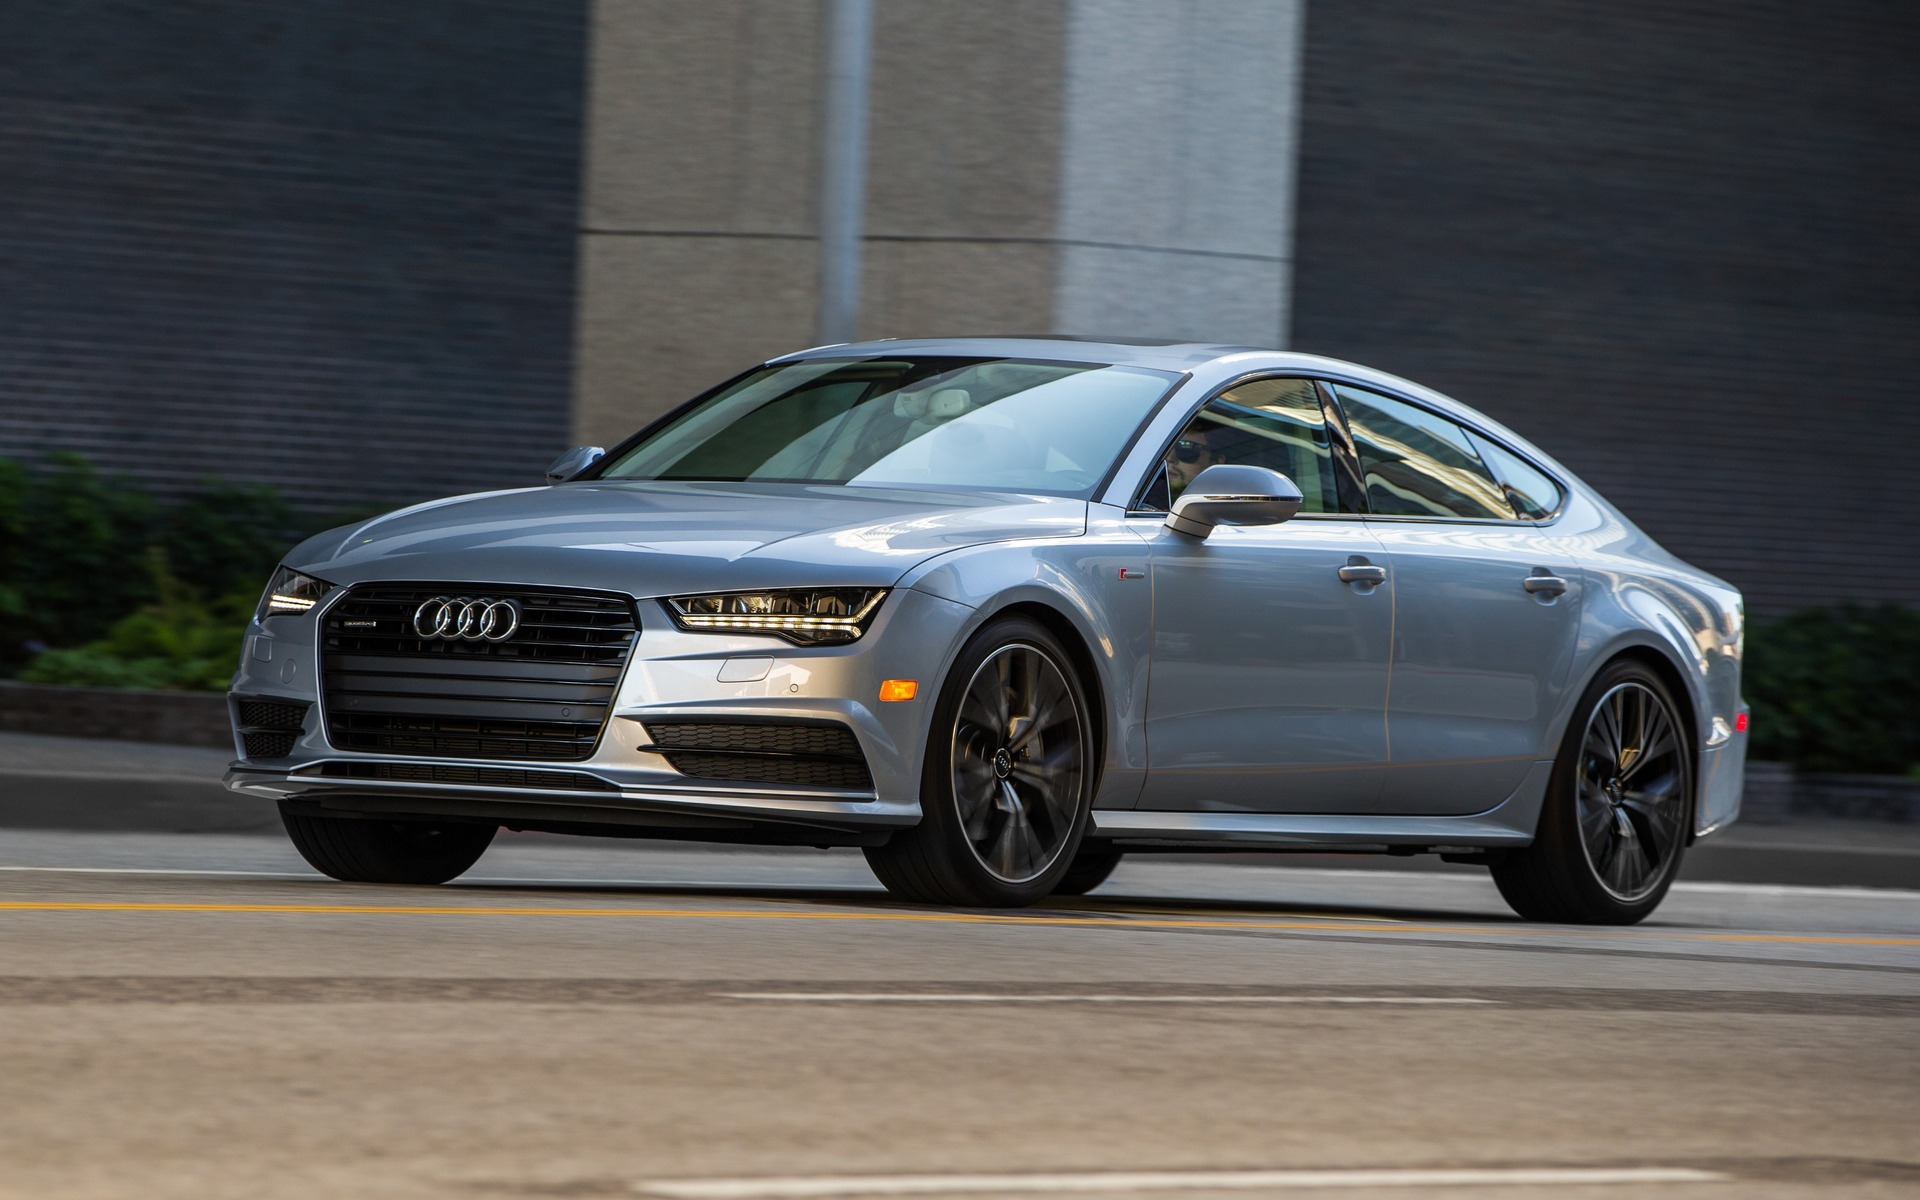 2017 Audi A7 - News, reviews, picture galleries and videos - The Car Guide